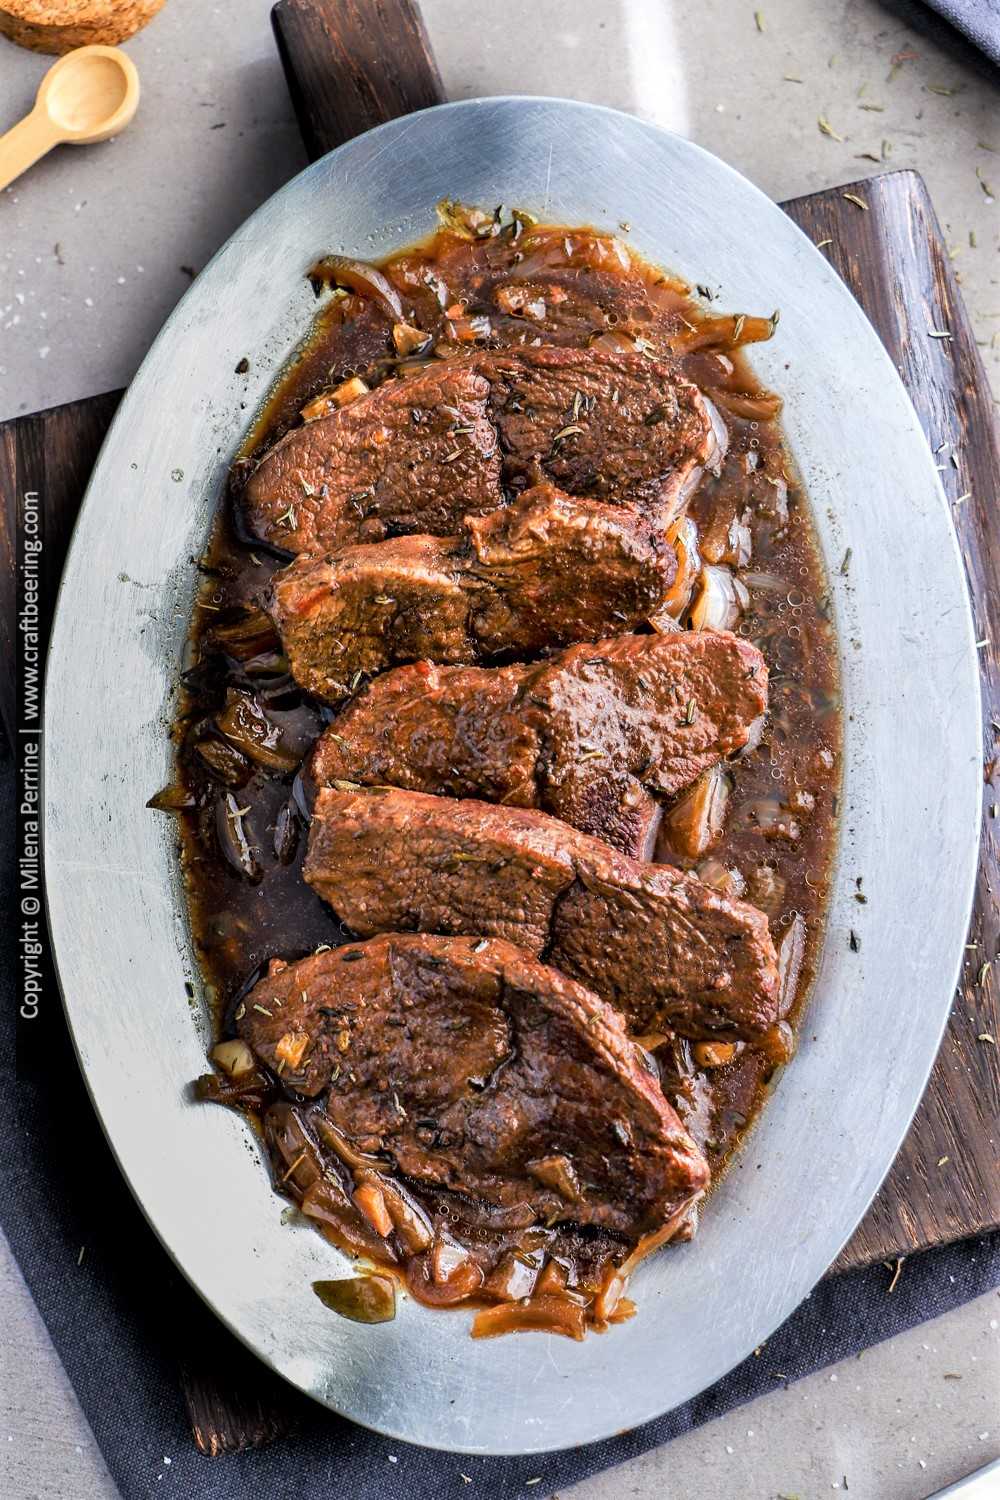 Mock tender steak braised to tenderness with red wine and onions